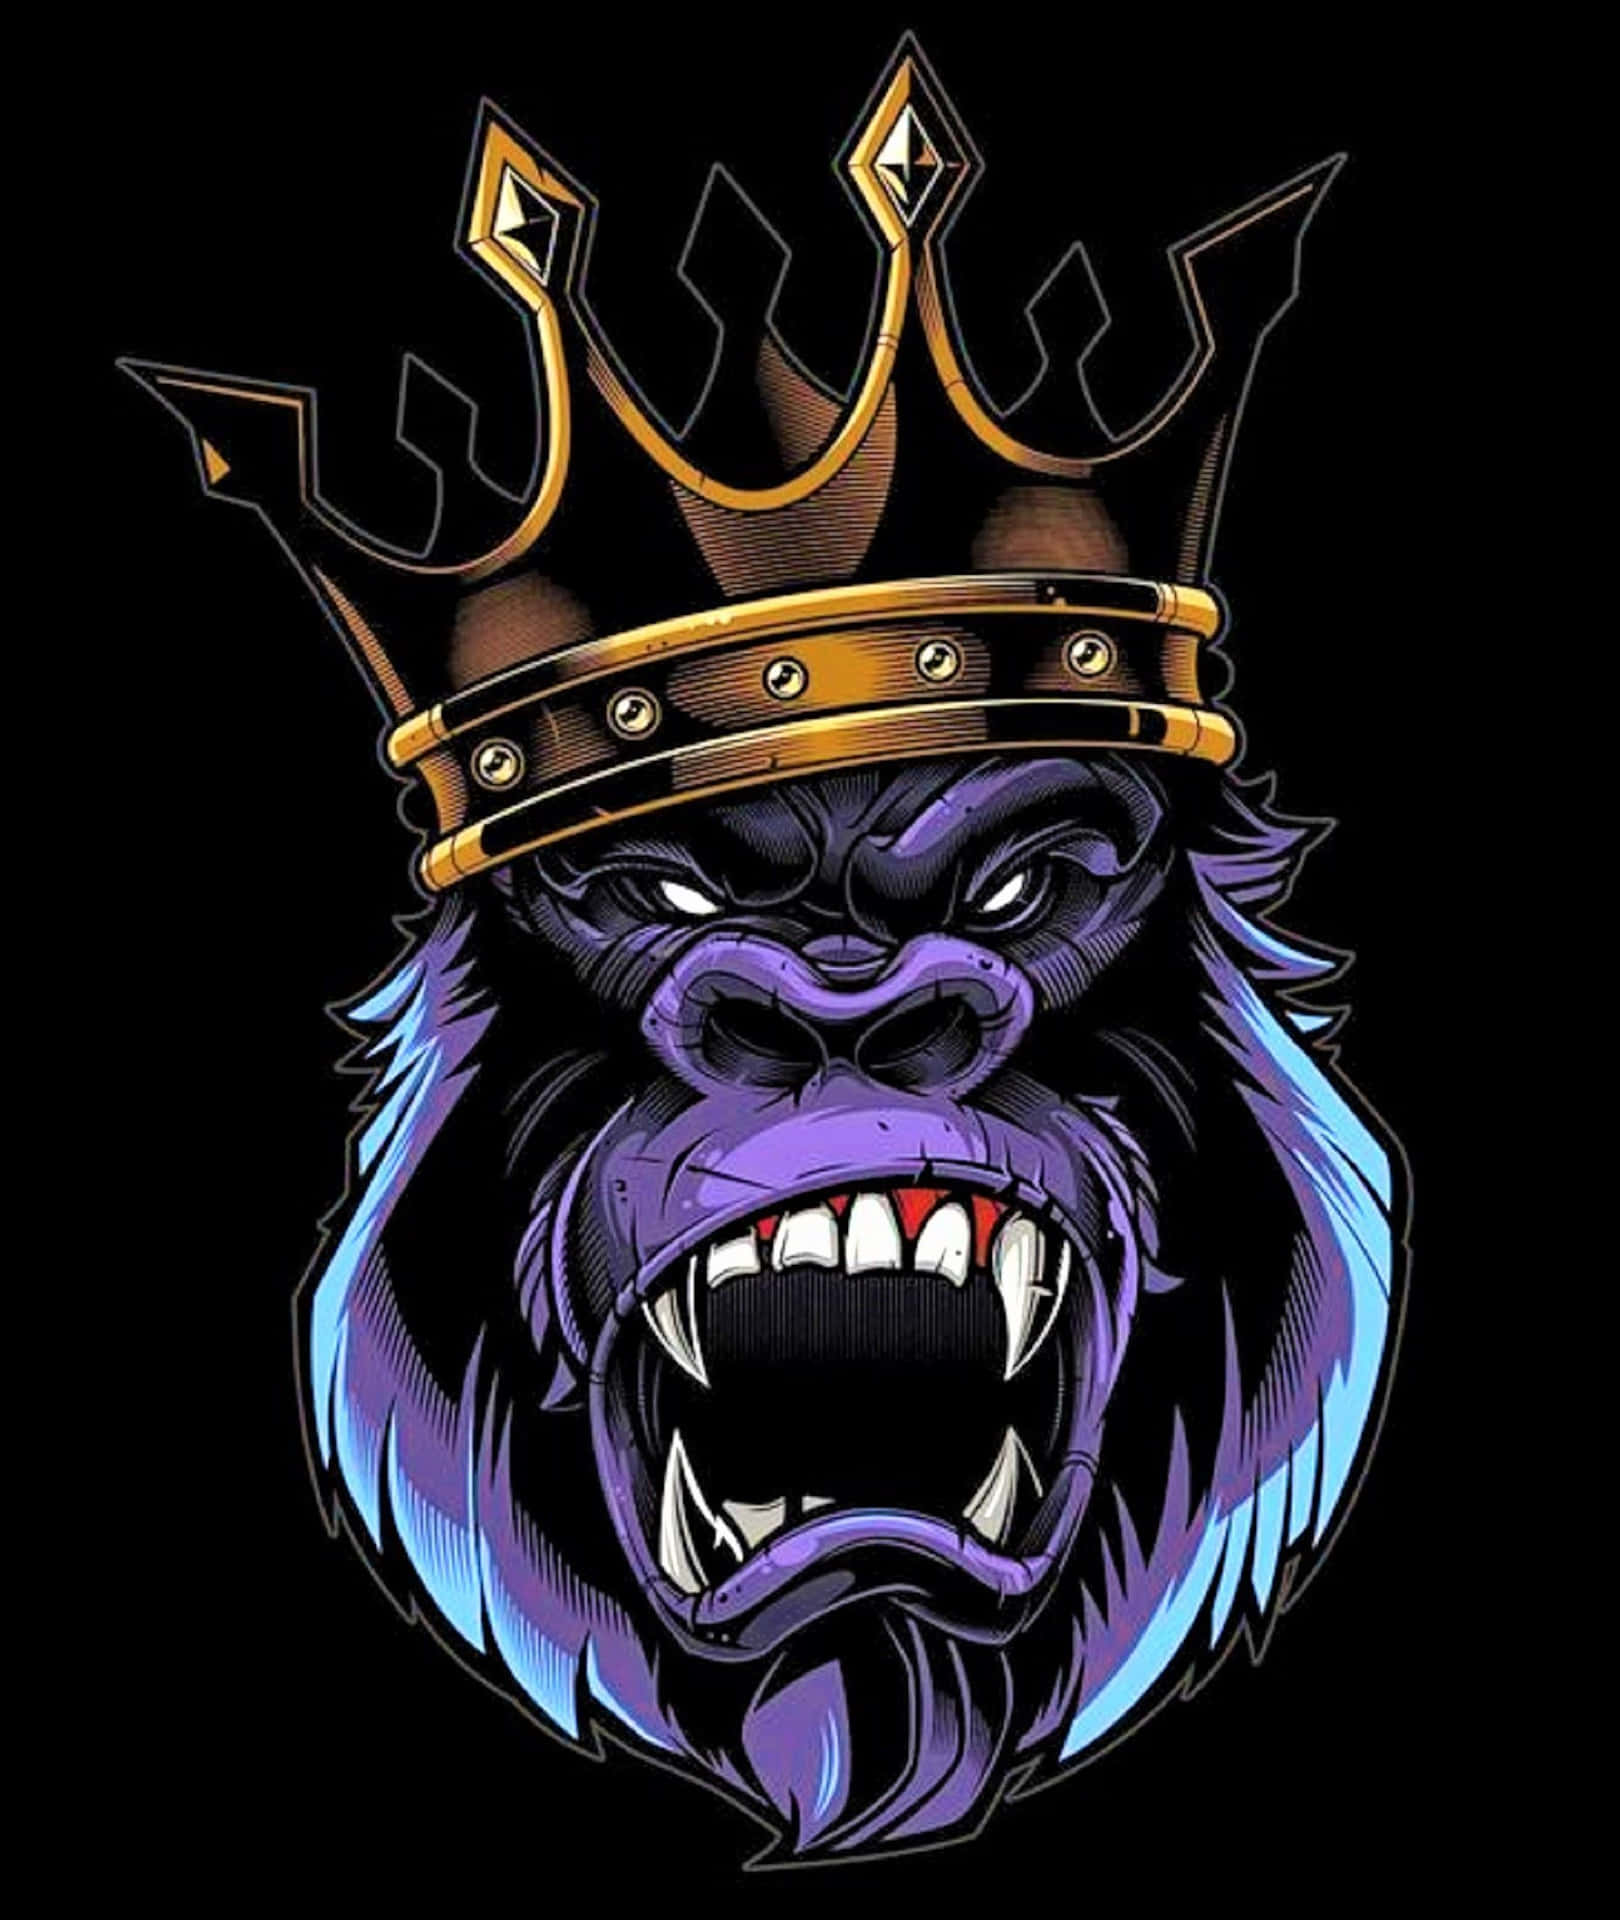 A Purple Gorilla With A Crown On It